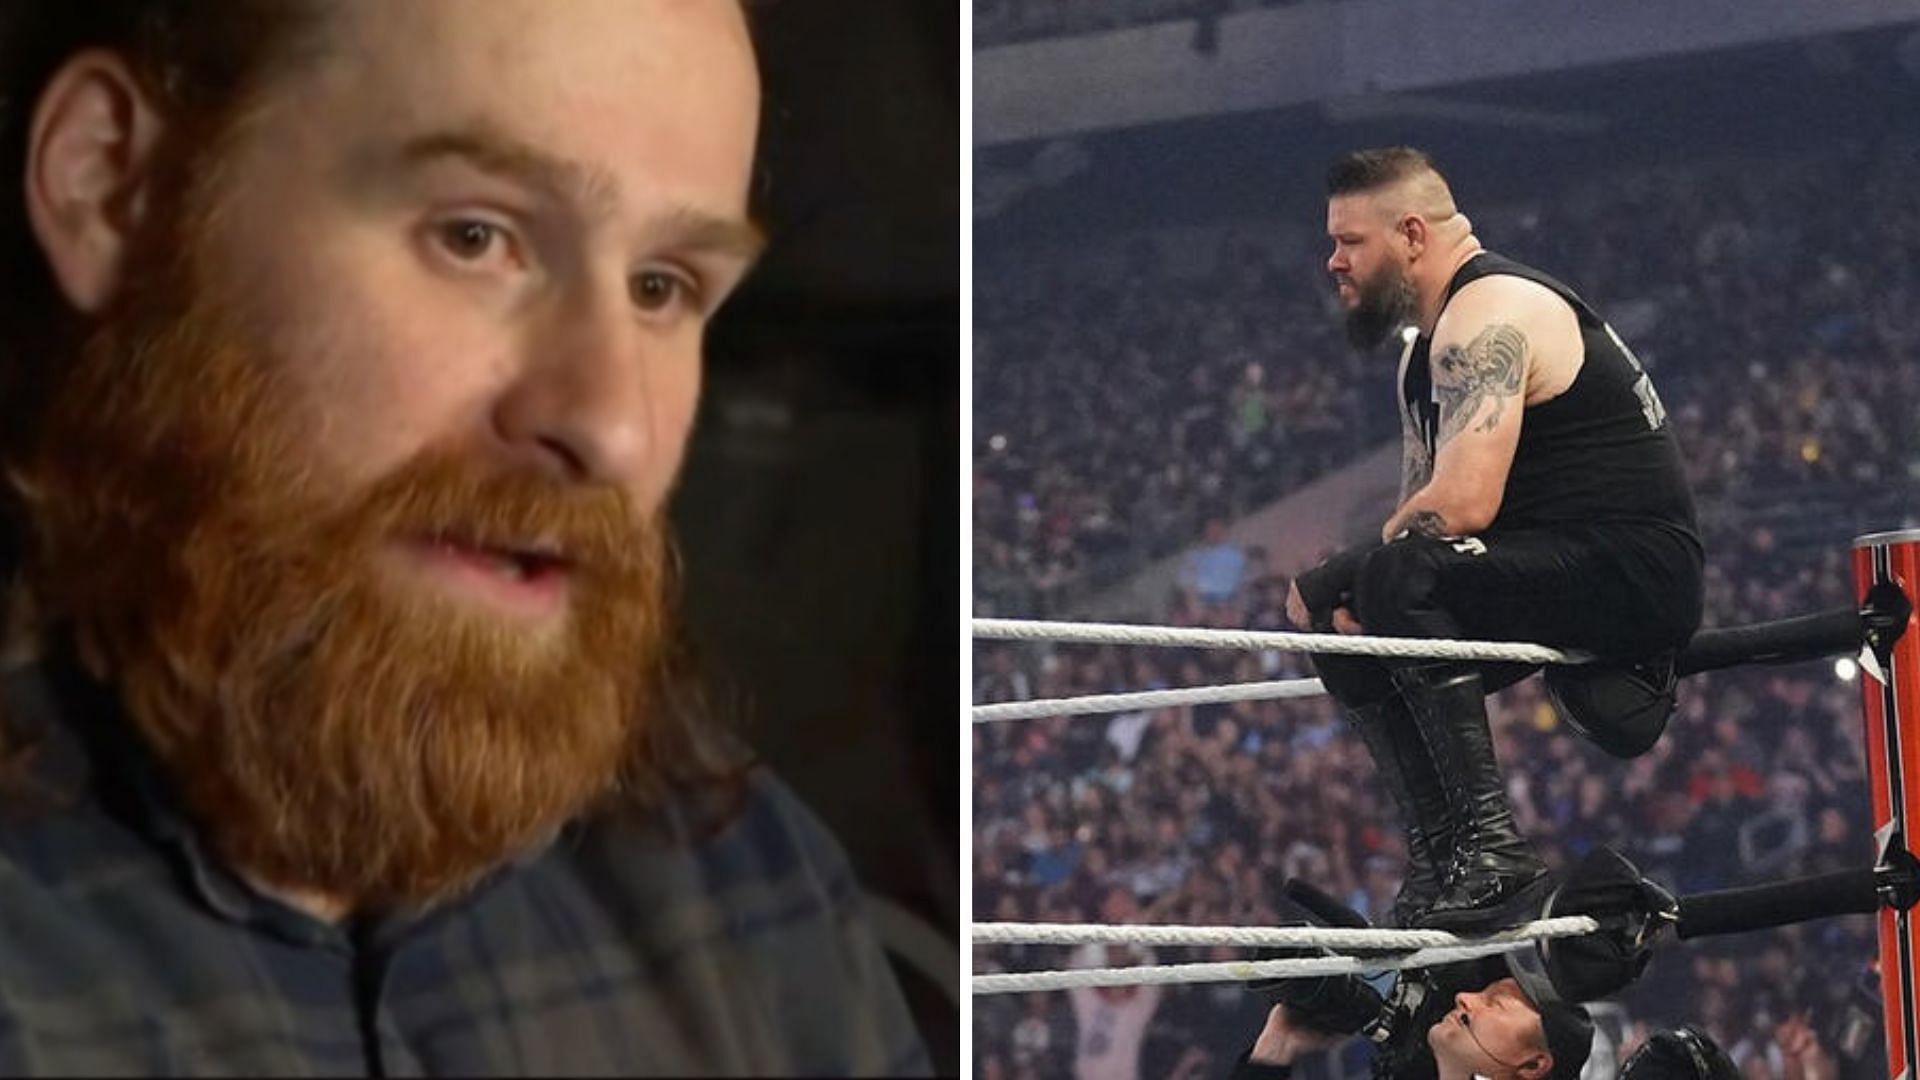 Sami Zayn and Kevin Owens are former WWE Undisputed Tag Team Champions [Image credits: Zayn